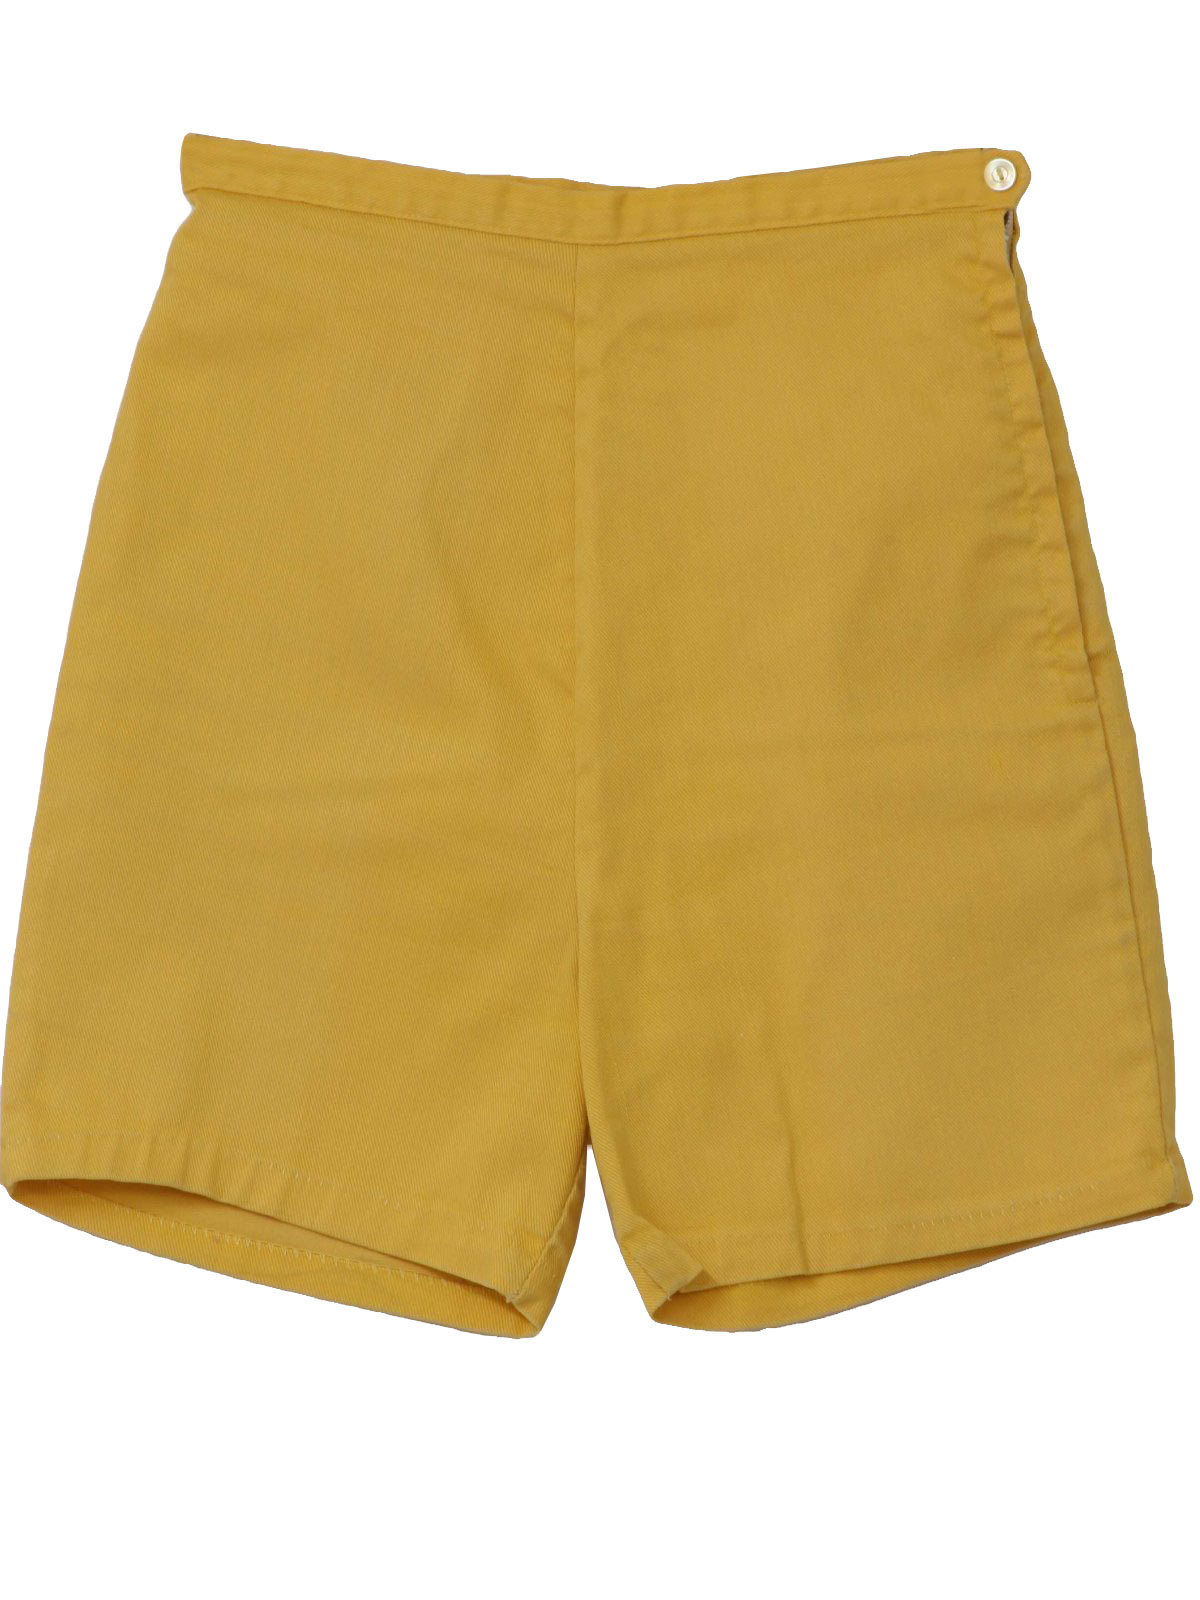 1960's Vintage Shorts: Early 60s -No Label- Womens butter yellow ...